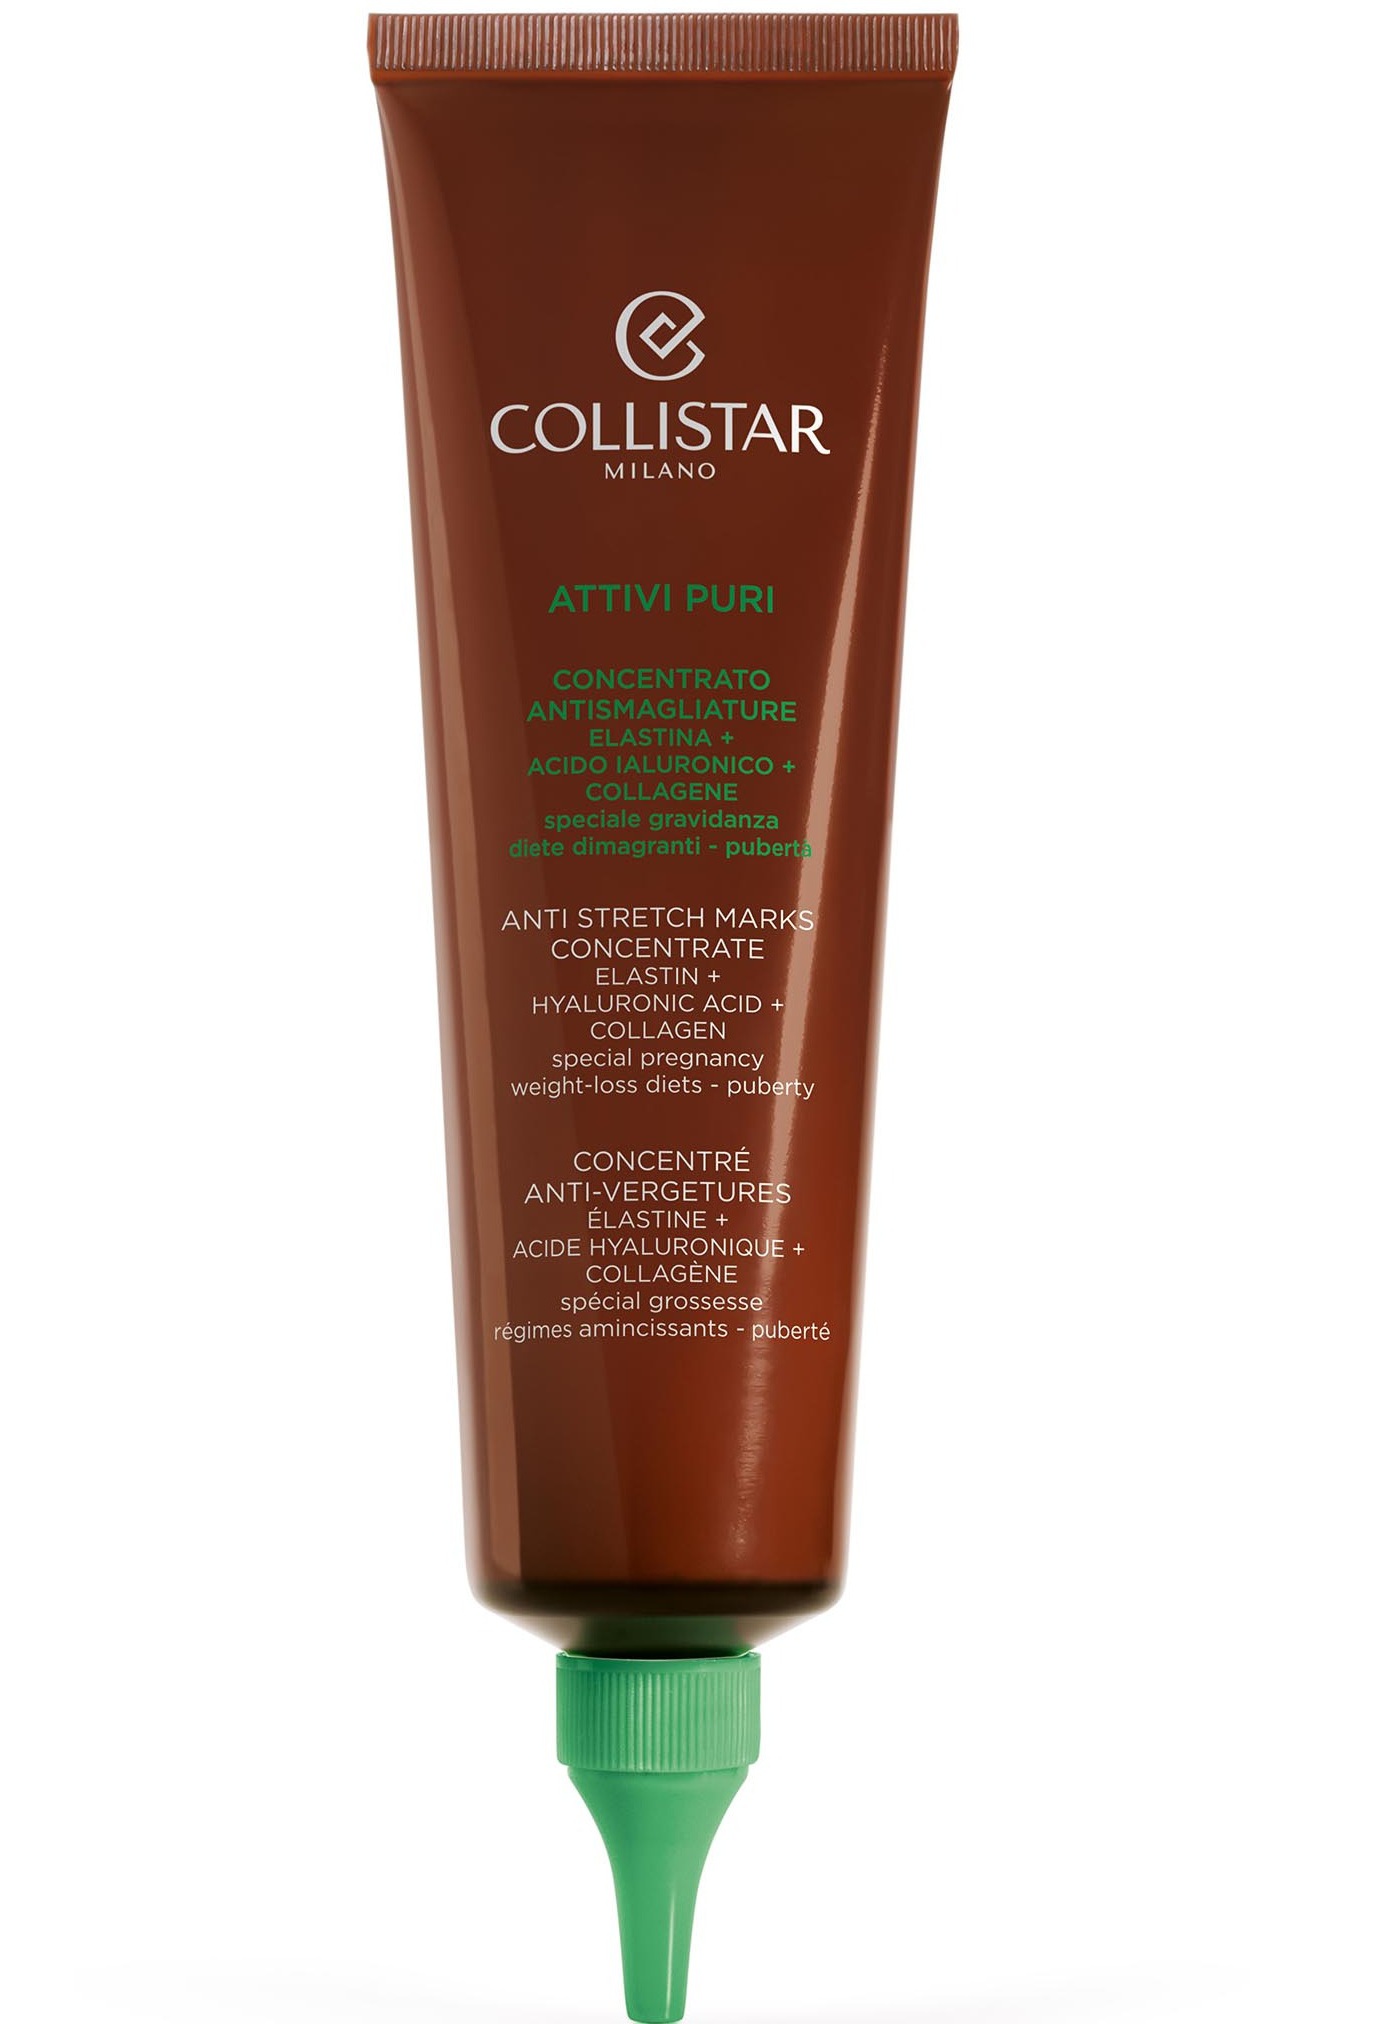 Collistar Pure Actives Anti-stretch Mark Concentrate Elastin + Hyaluronic Acid + Collagen